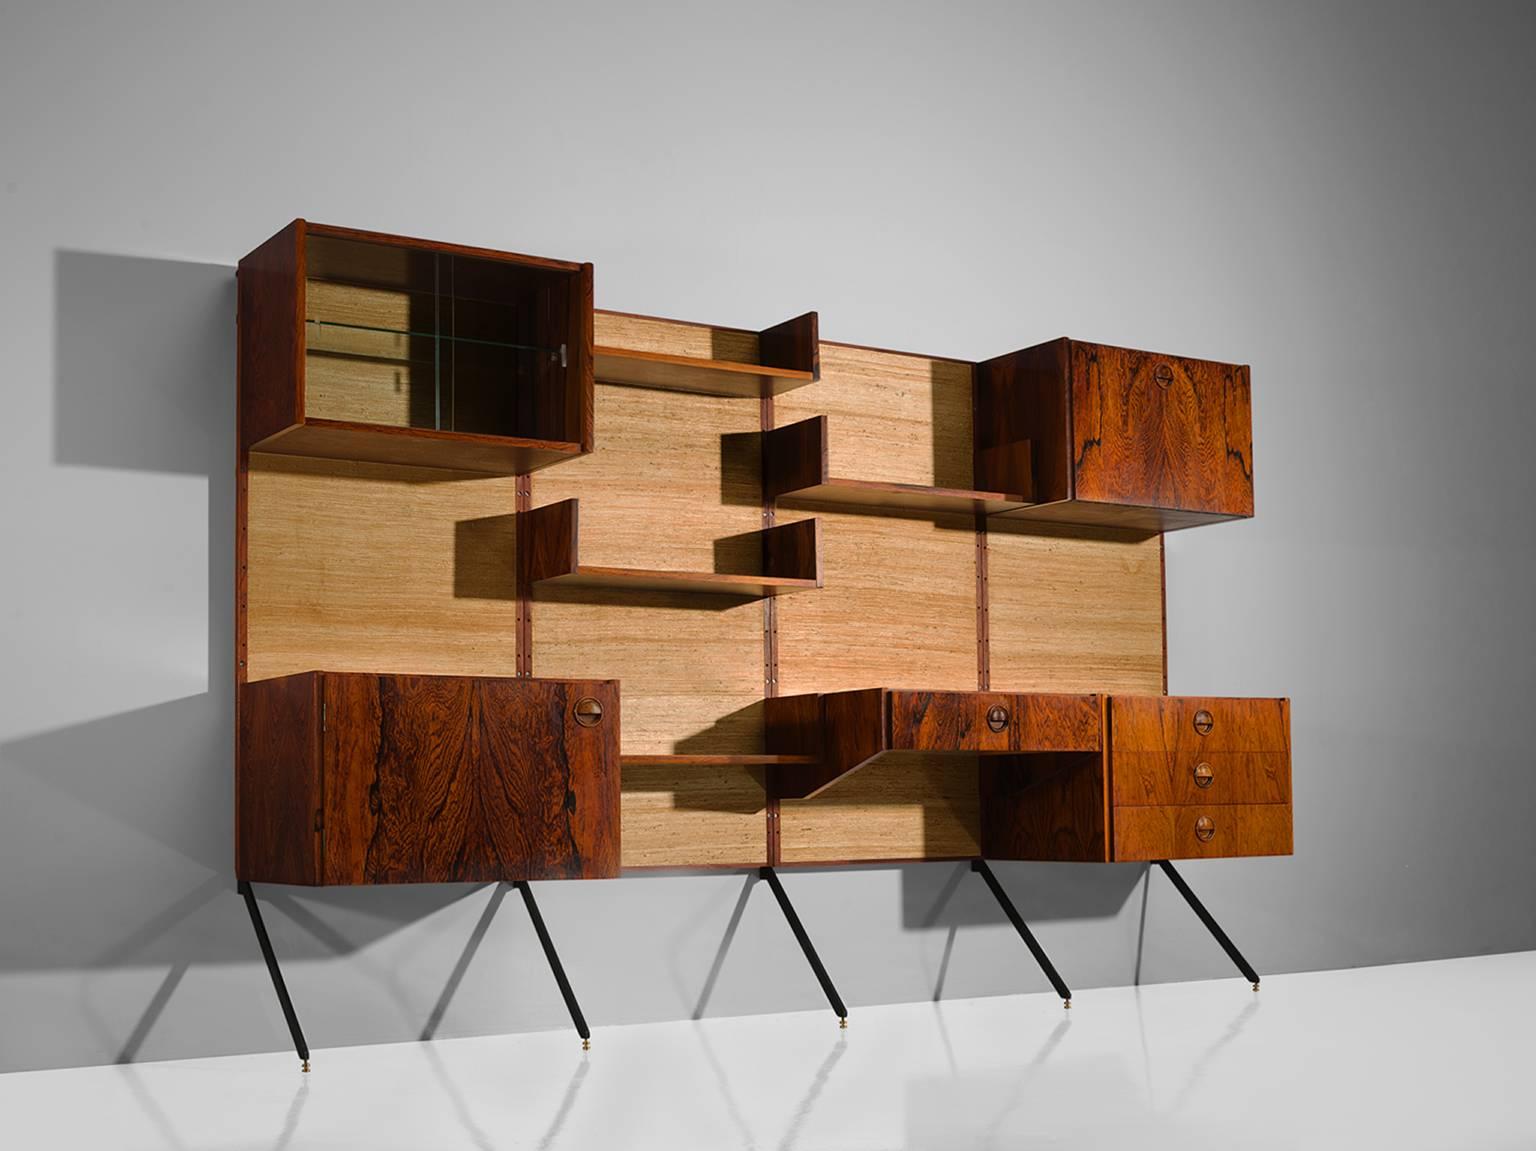 Fristho, rosewood, seagrass, the Netherlands, 1950s.

This very rare wall unit is executed in natural materials such as rosewood and seagrass. The combination of these rich, textural materials form a wonderful warm unity. The shelves can be freely